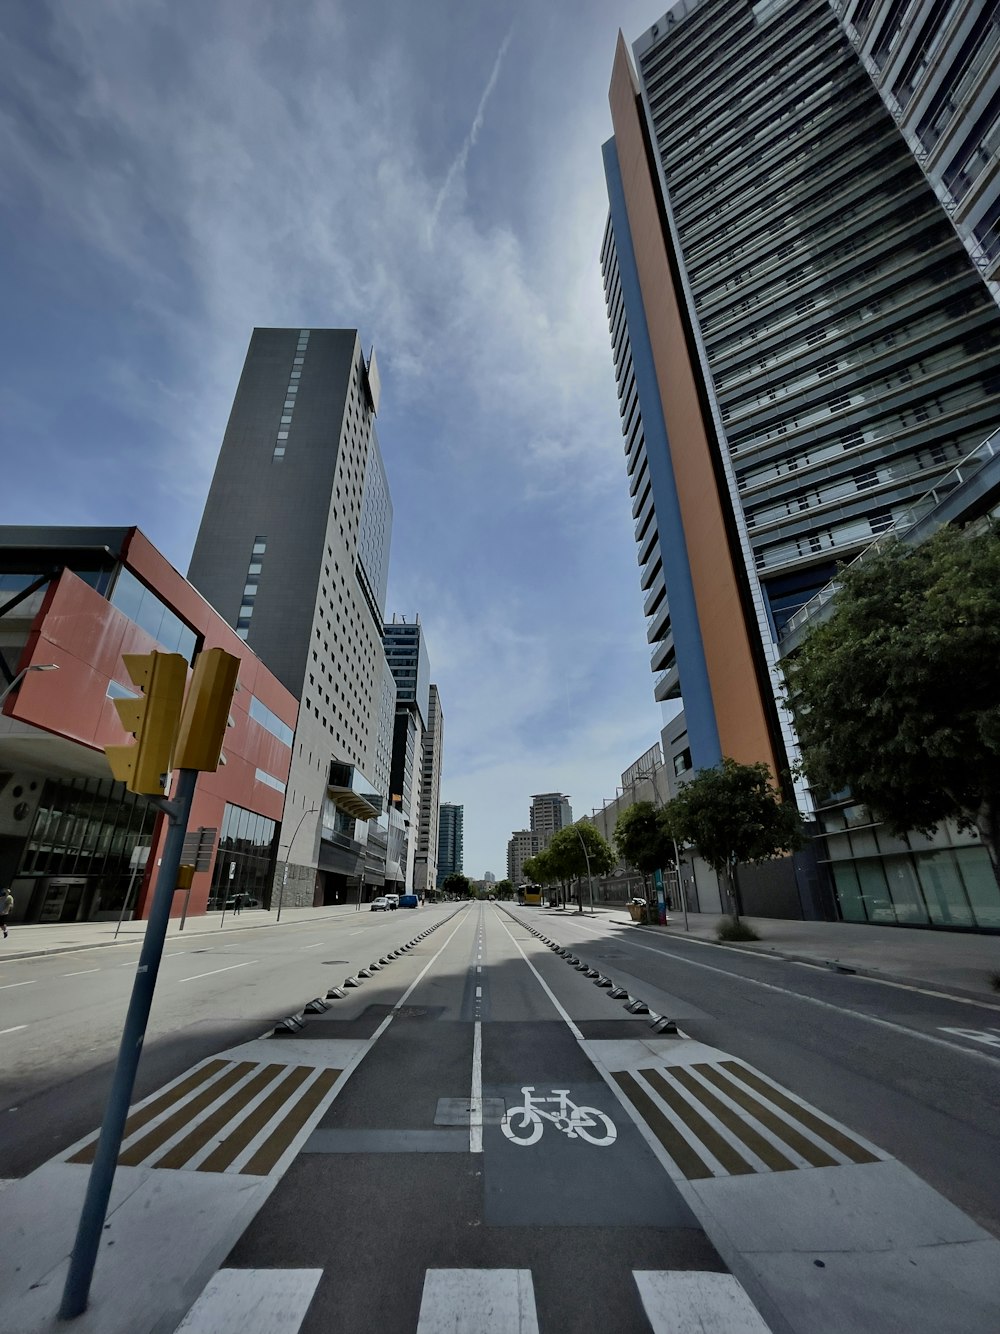 gray concrete road between high rise buildings during daytime